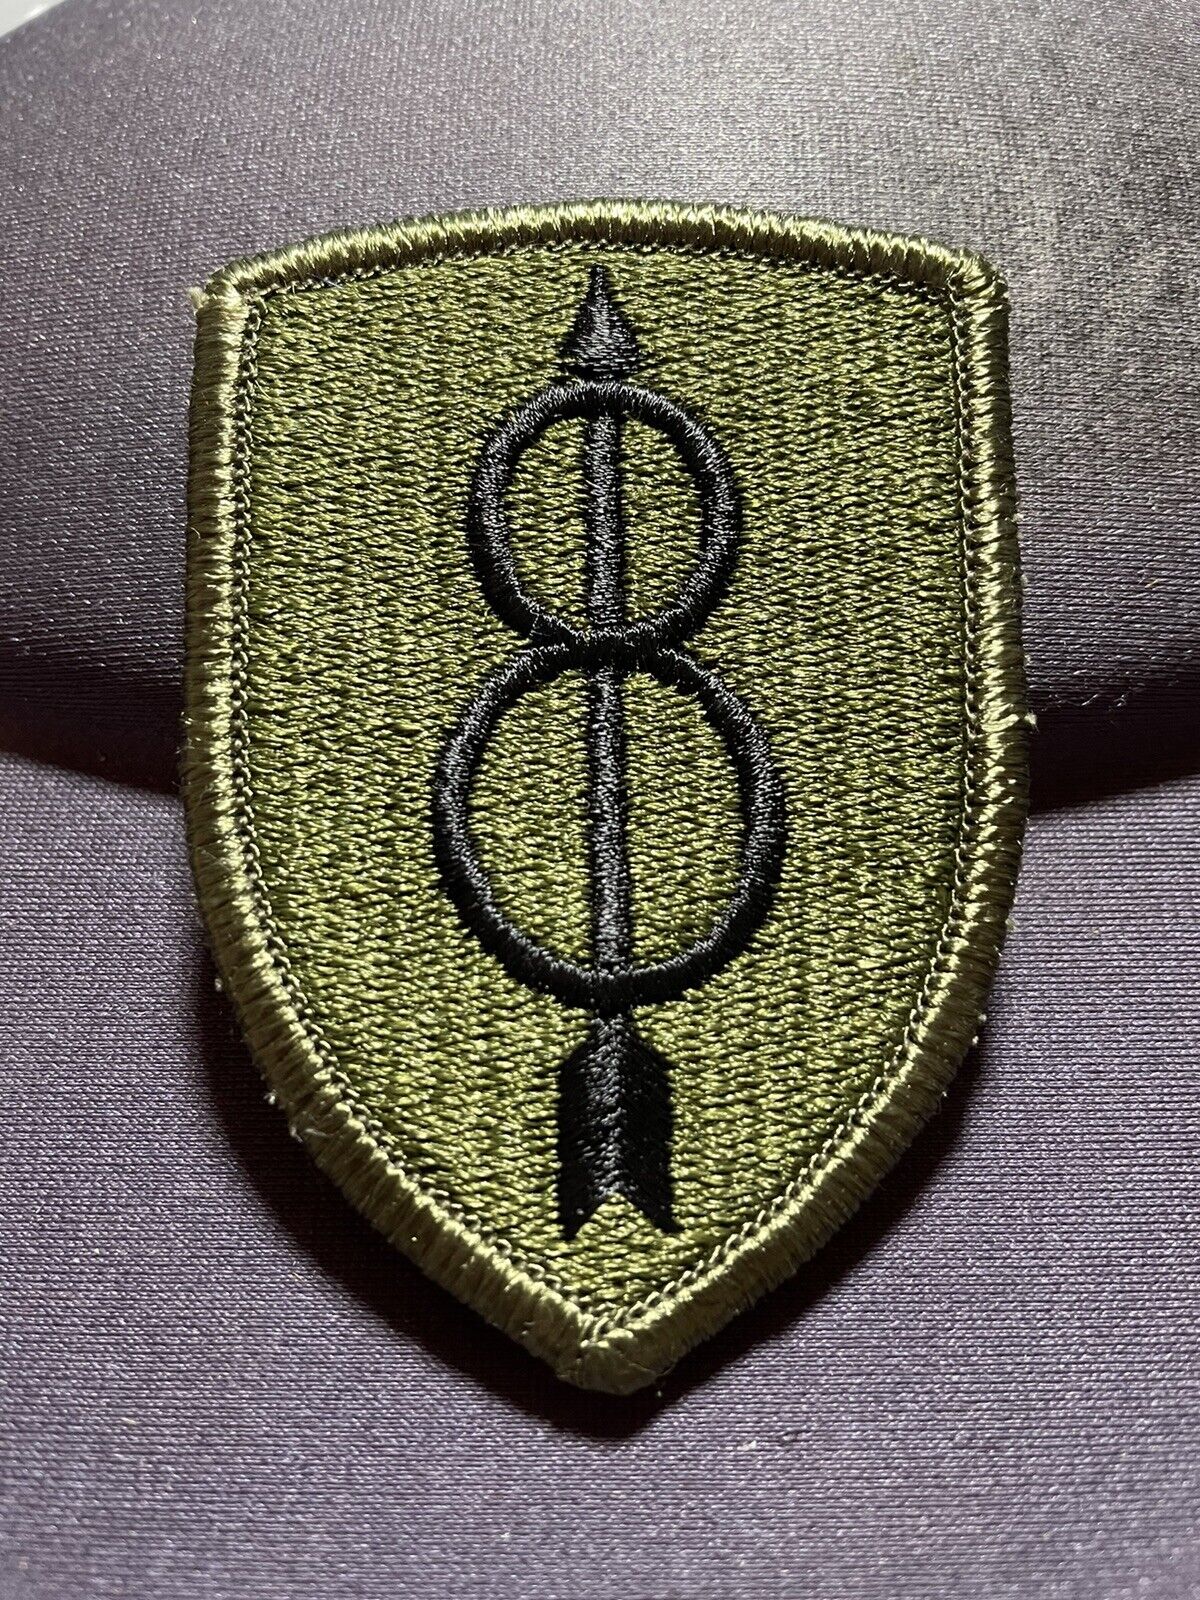 8TH INFANTRY DIVISION US ARMY MILITARY PATCH SUBDUED #2